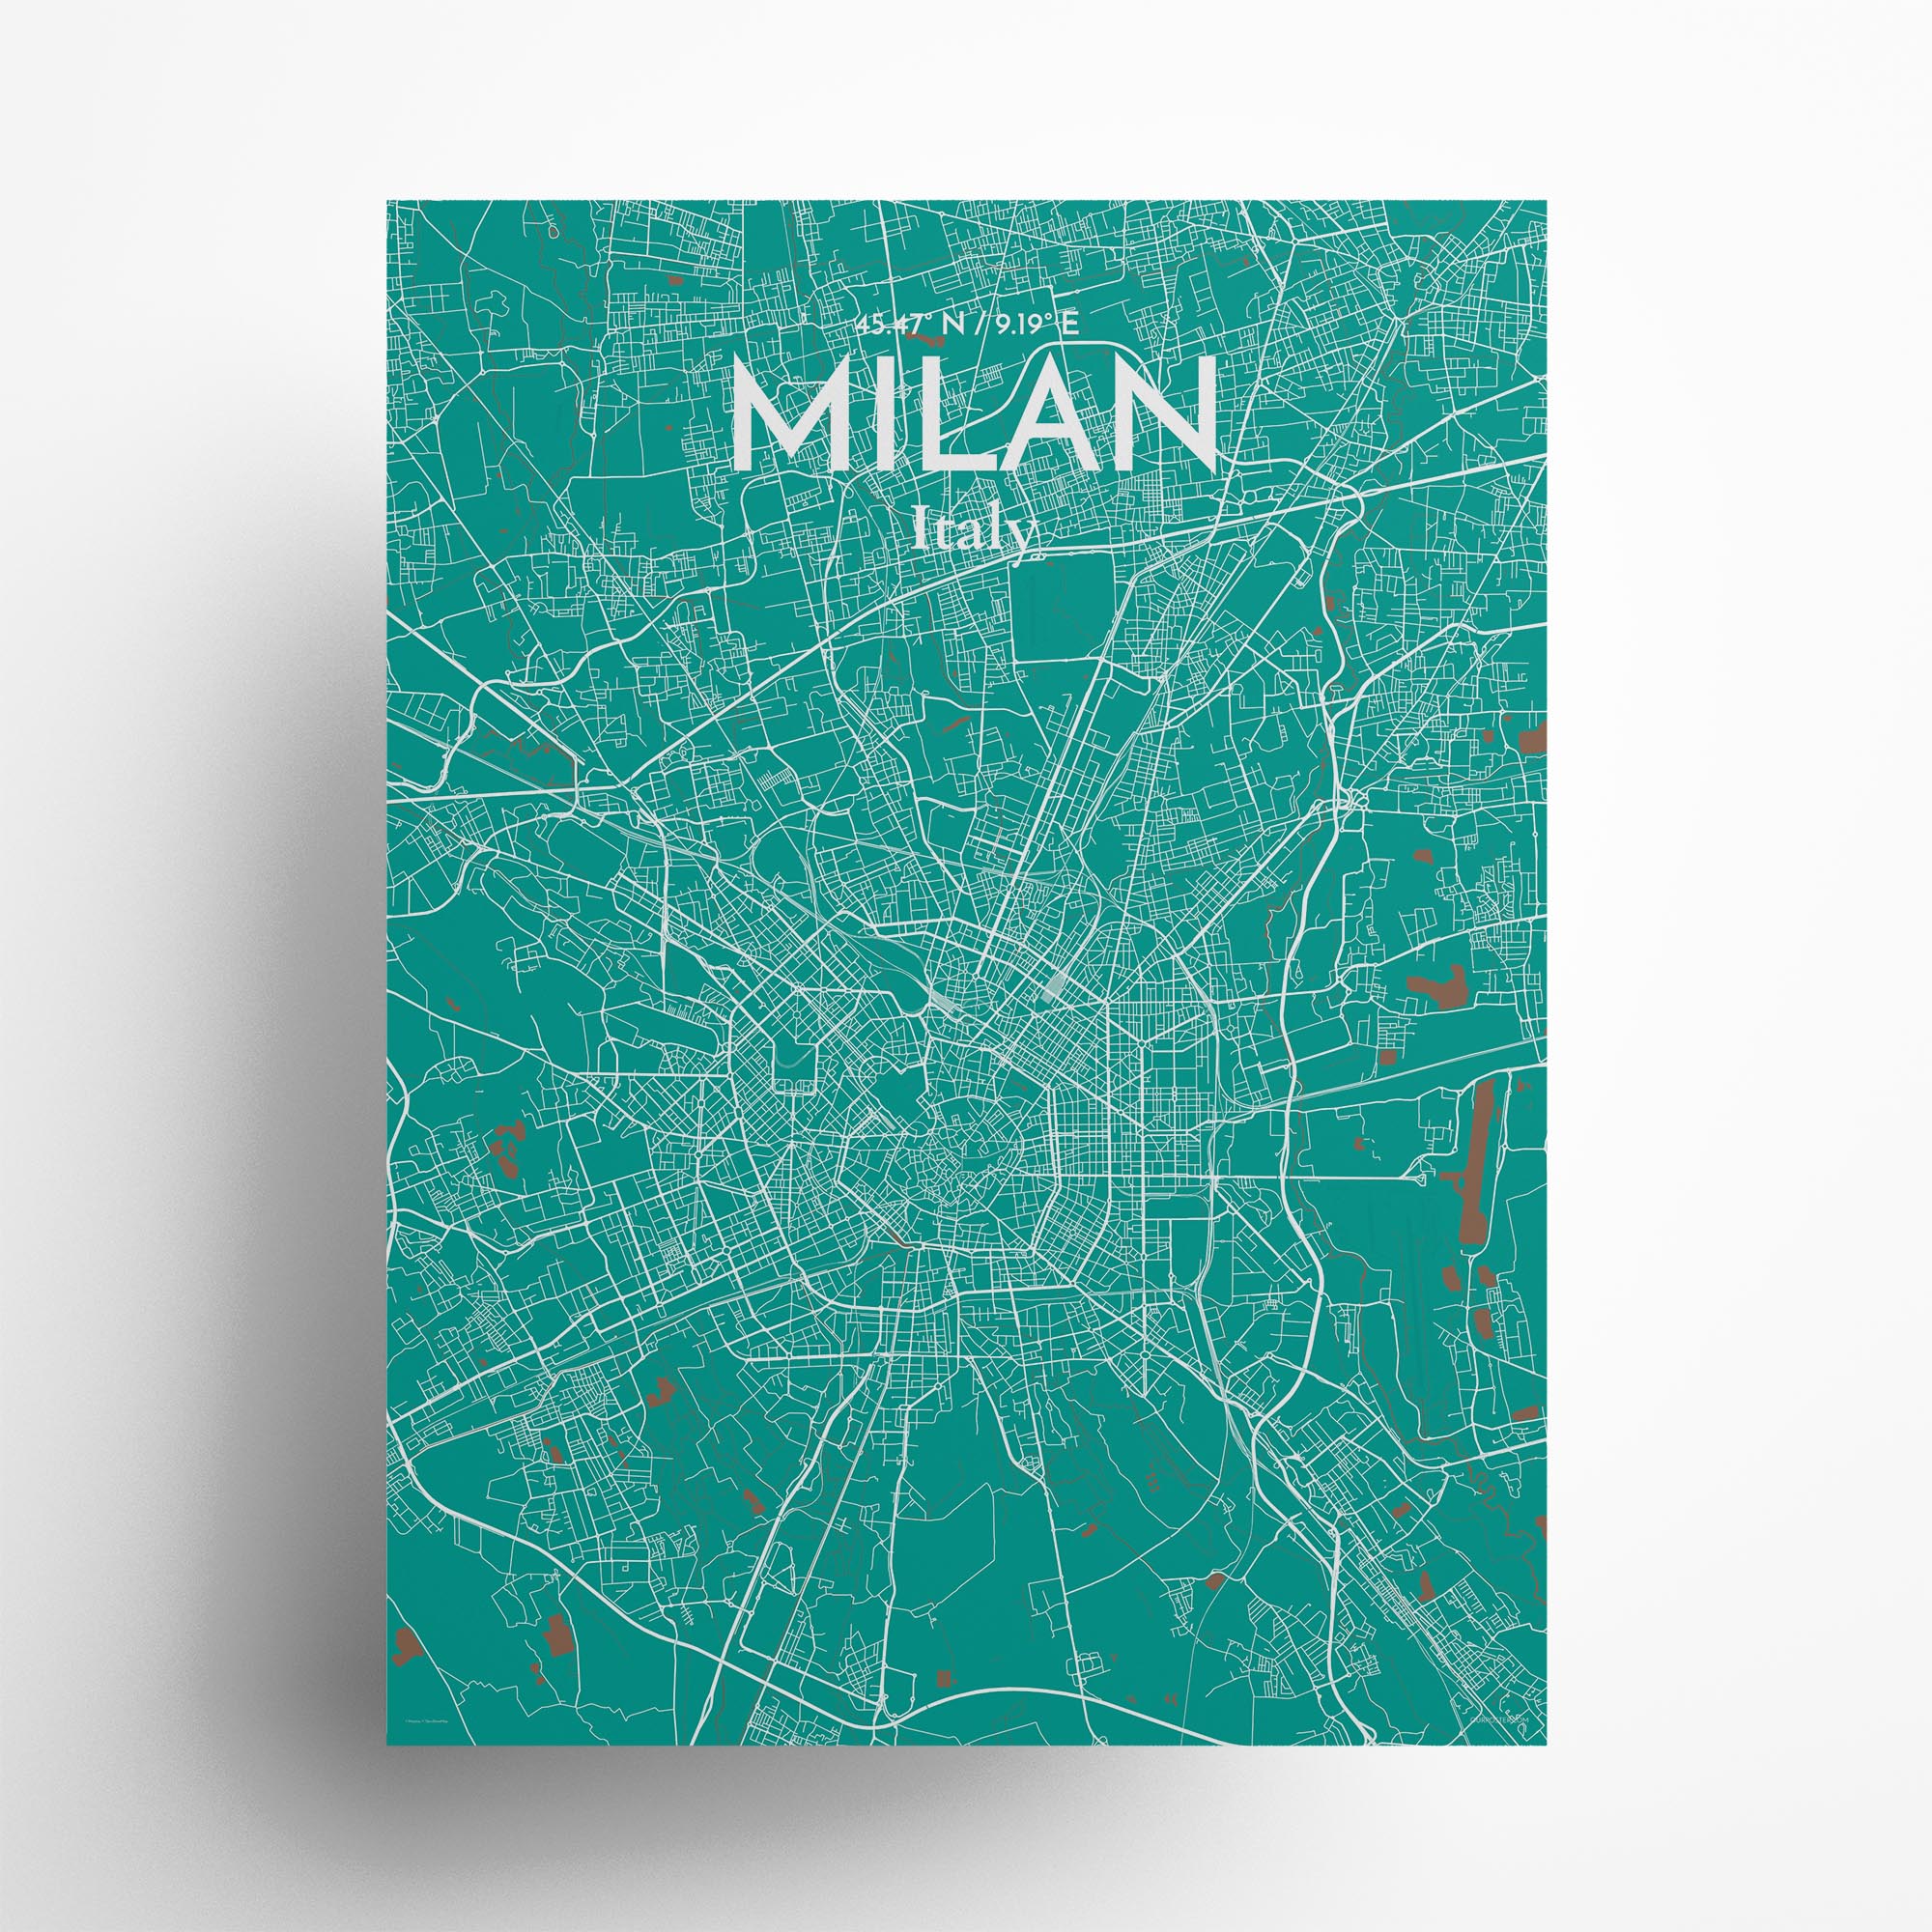 Milan city map poster in Nature of size 18" x 24"